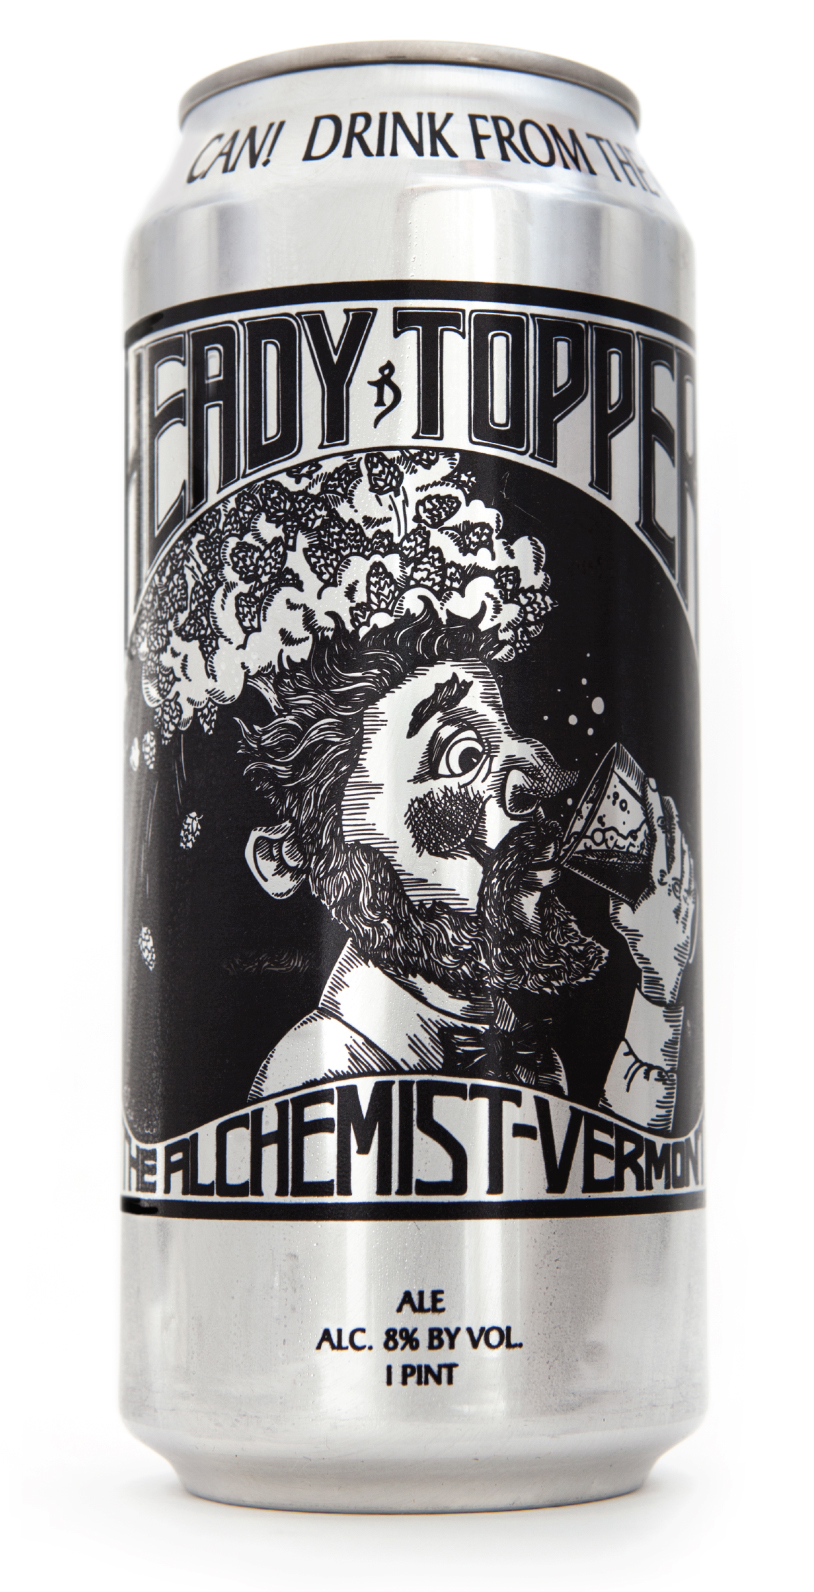 Heady Topper beer can, Greta Rybus